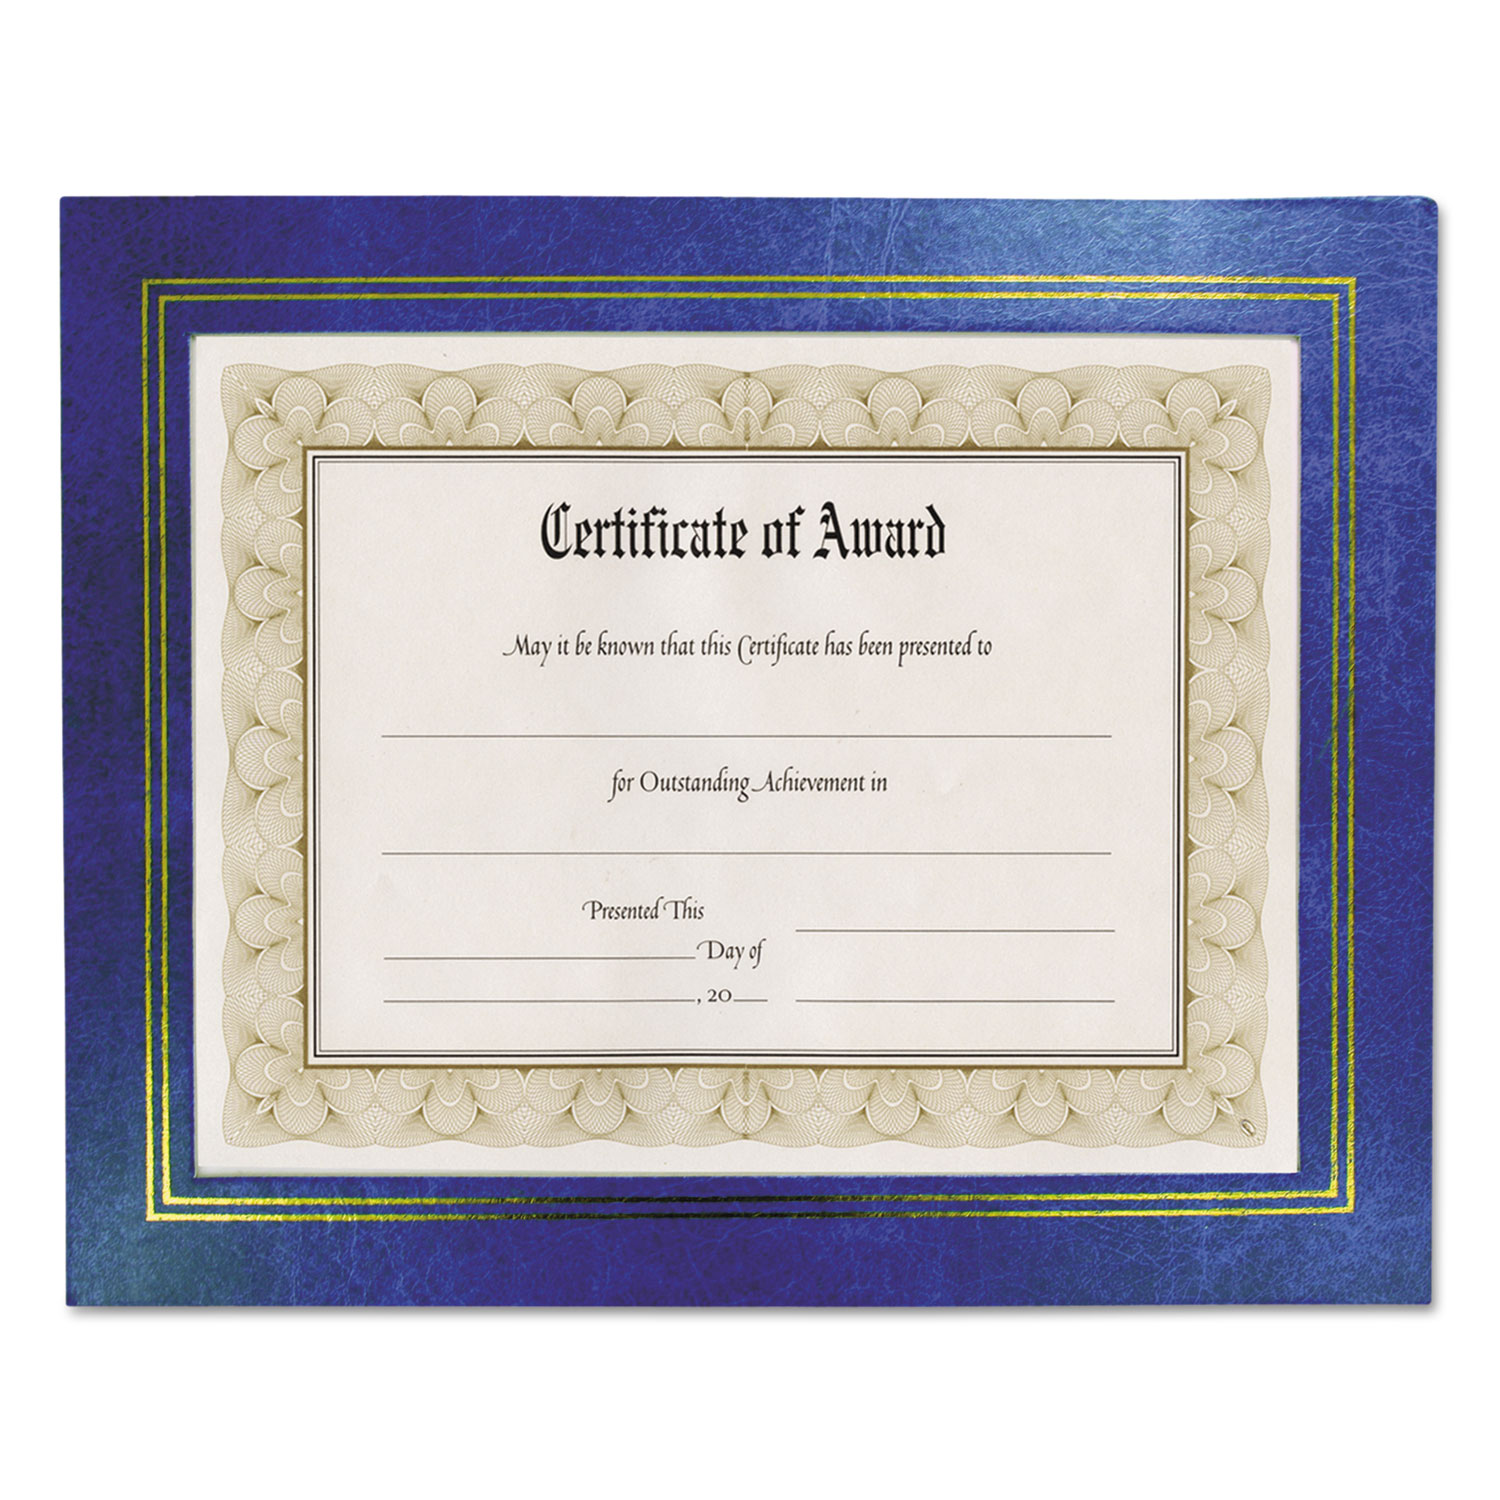  NuDell 21201 Leatherette Document Frame, 8-1/2 x 11, Blue, Pack of Two (NUD21201) 